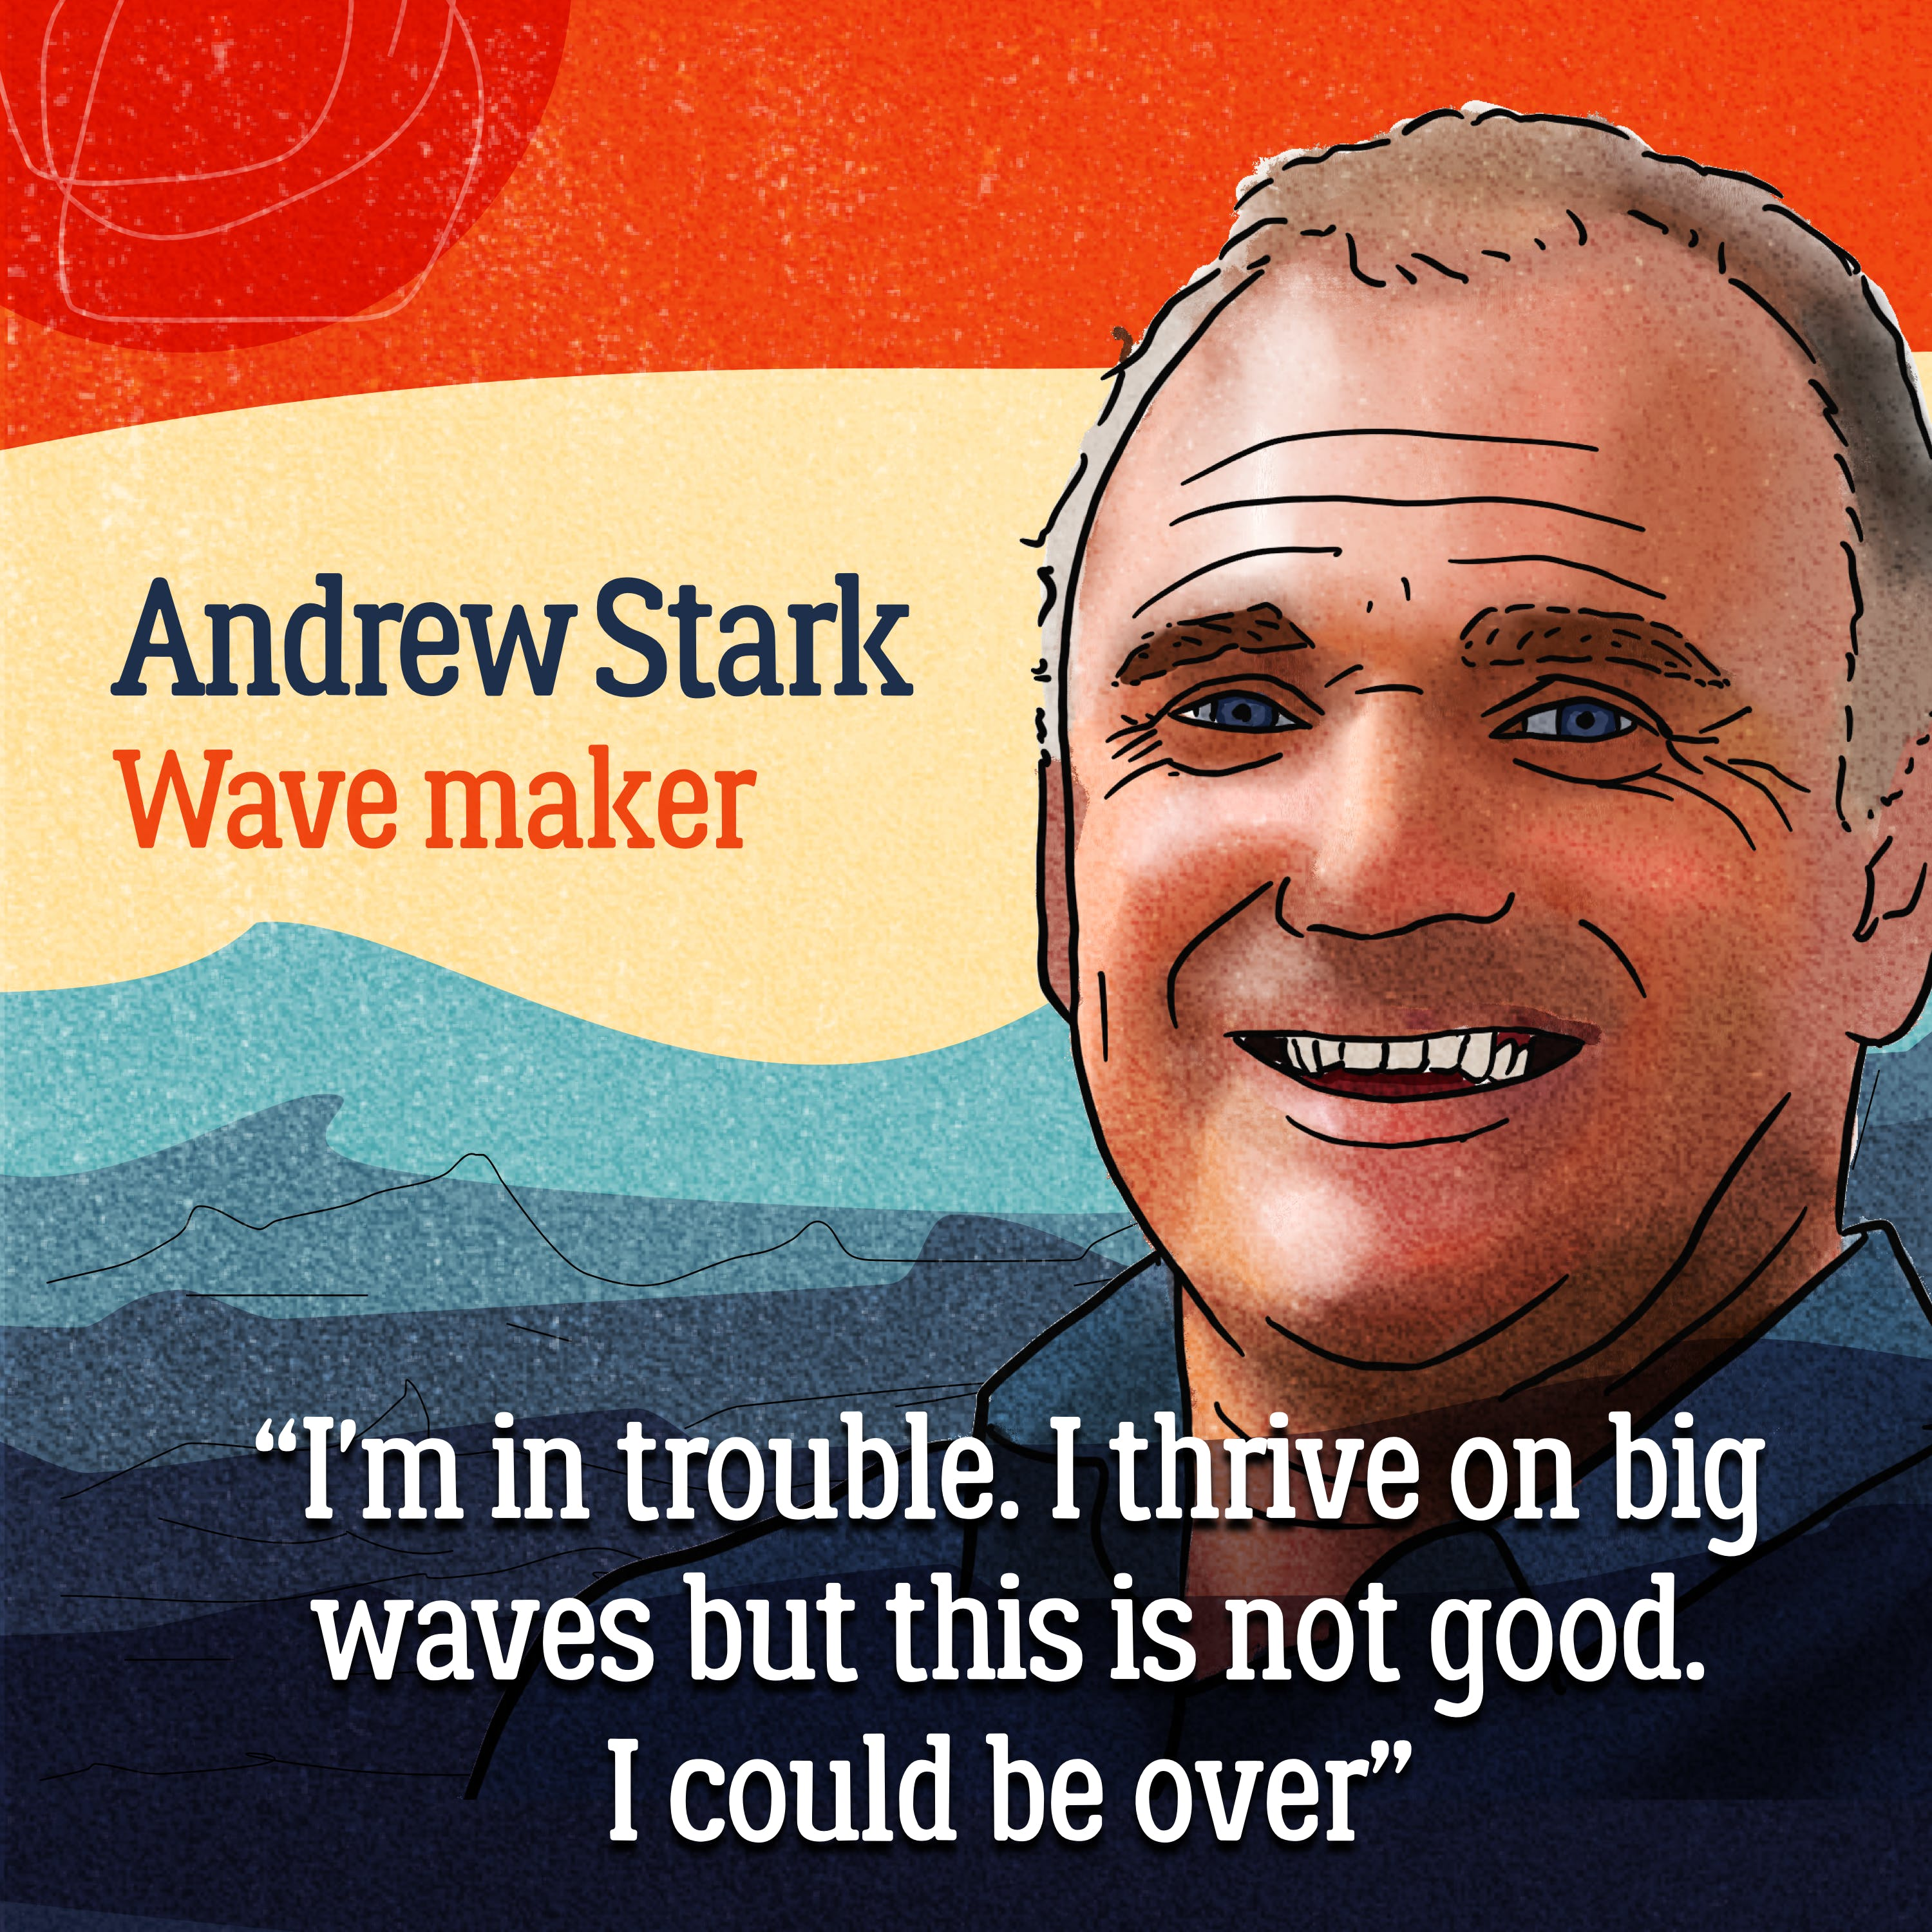 Turning the tide — How Andrew Stark transformed a crushing wave into the ride of his life